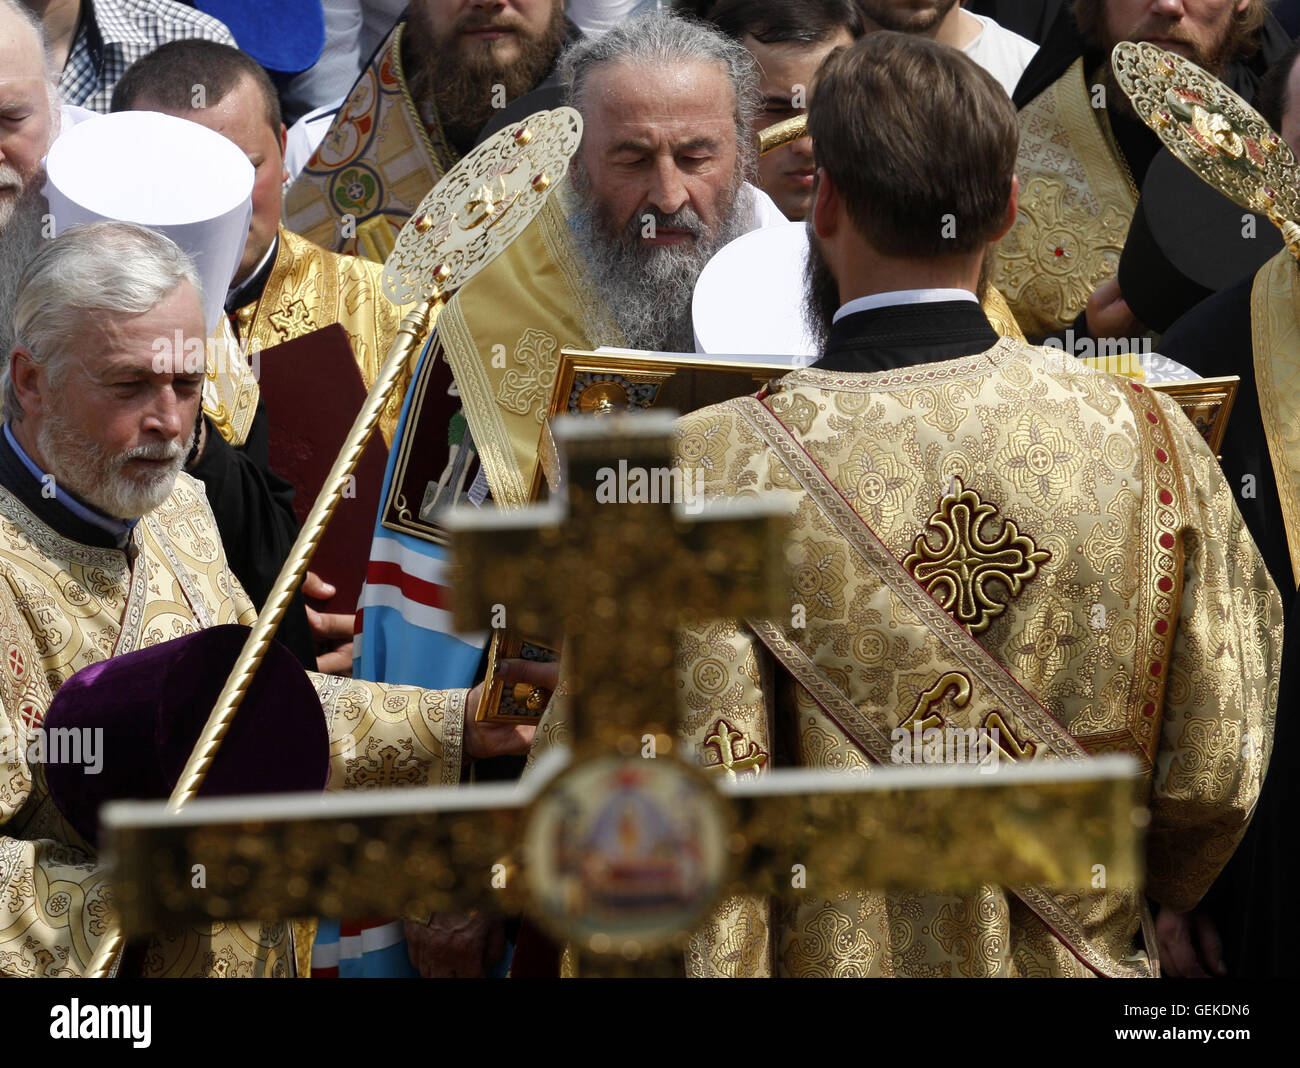 Kiev, Ukraine. 27th July, 2016.  Head of Ukraine's Orthodox Church of Moscow Patriarchy Metropolitan Onufry (C) conducts a prayer service held at the St. Vladimir's Hill, marking the 1028th anniversary of the Baptism of Kievan Rus in Kiev on July 27, 2016. Credit:  Anatolii Stepanov/ZUMA Wire/Alamy Live News Stock Photo